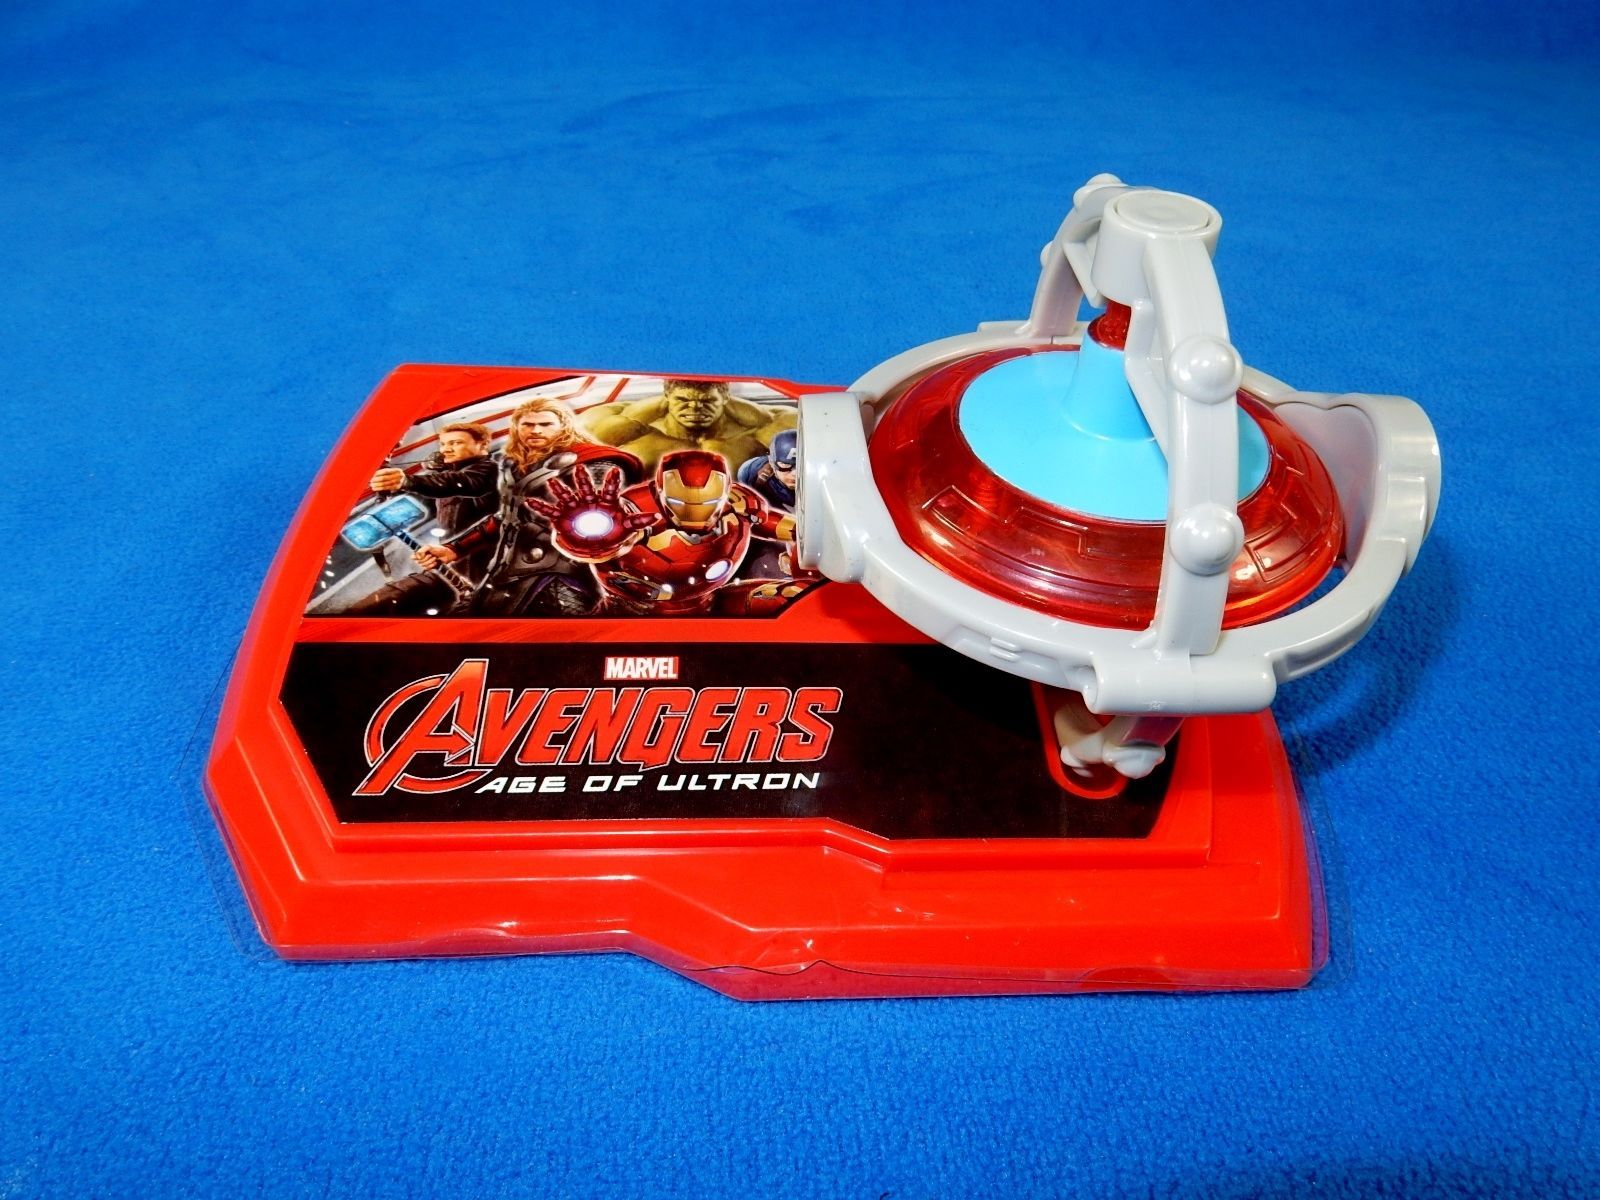 Primary image for Avengers 2 - Age of Ultron, Cake Decorating Kit w/Spinning Light Up Toy, DecoPac